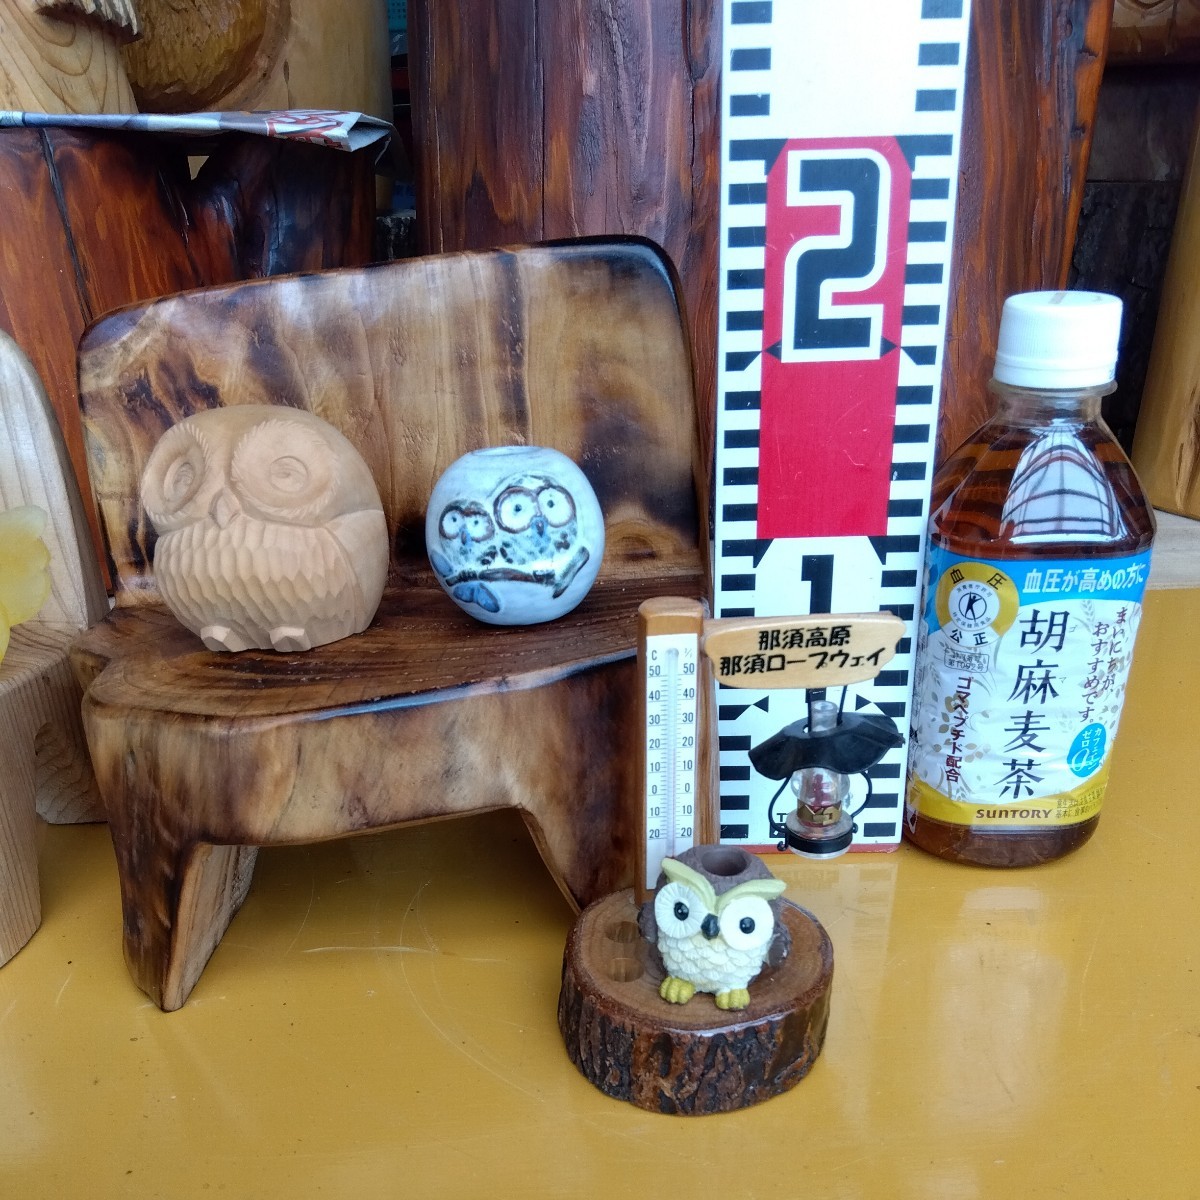  handmade woodworking goods ②3 points collection display shelf . how? interval . material ( Japanese cedar material ). valid practical use image from decision,. consent can person image 8 sheets eyes on and after is use example 